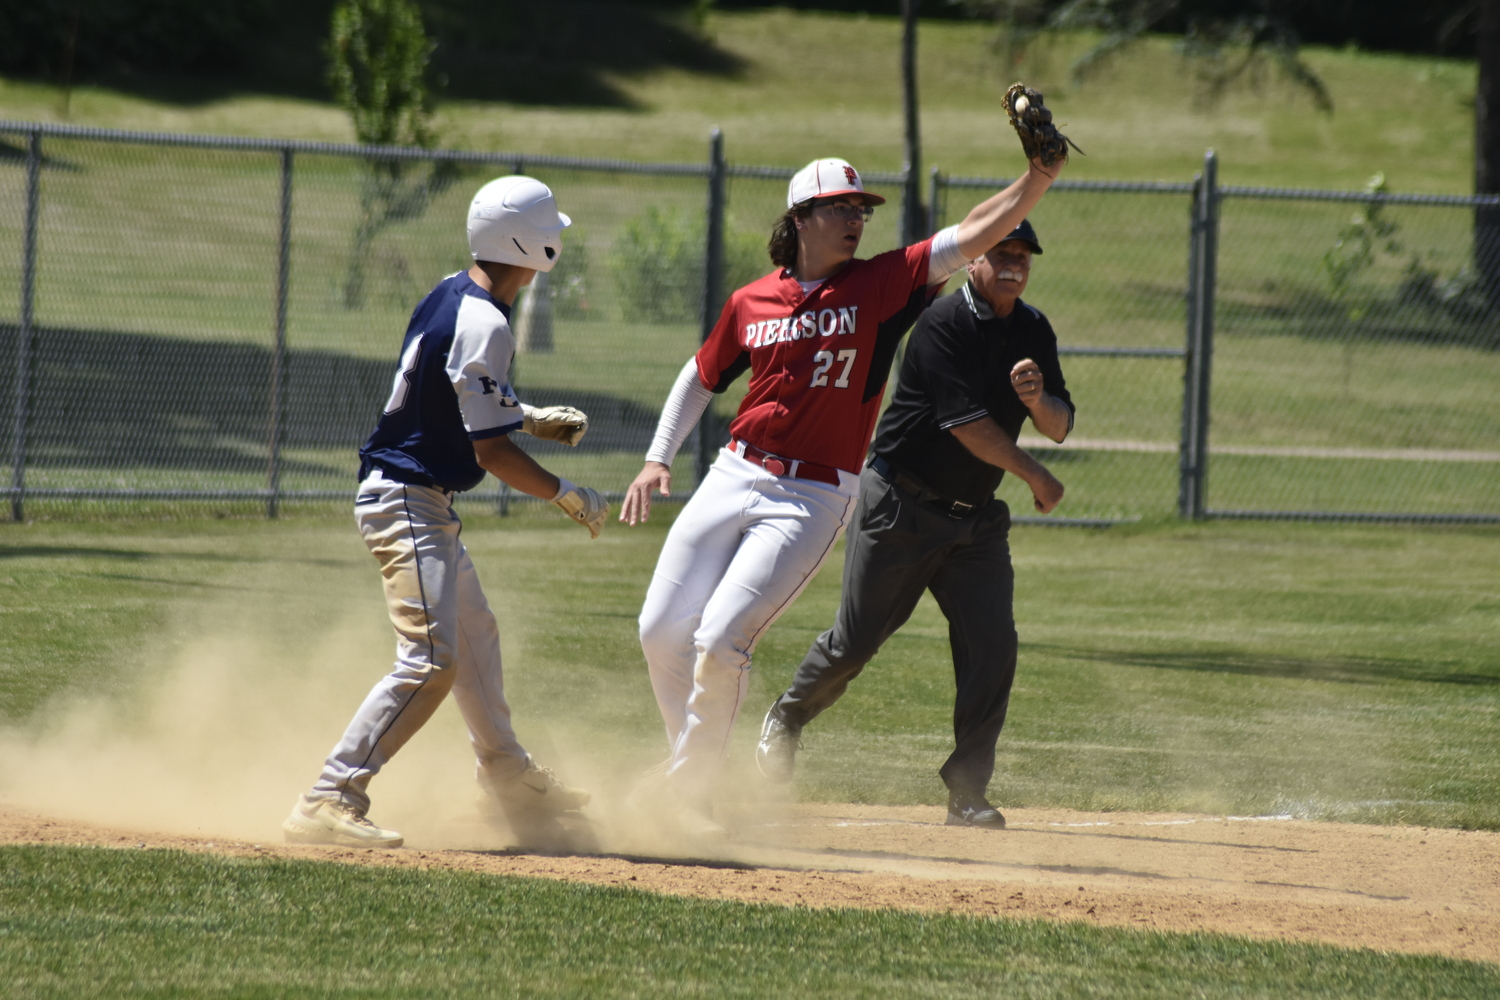 Pierson third baseman Charles Schaefer tags out a Burke Catholic player trying to steal third base.   DREW BUDD